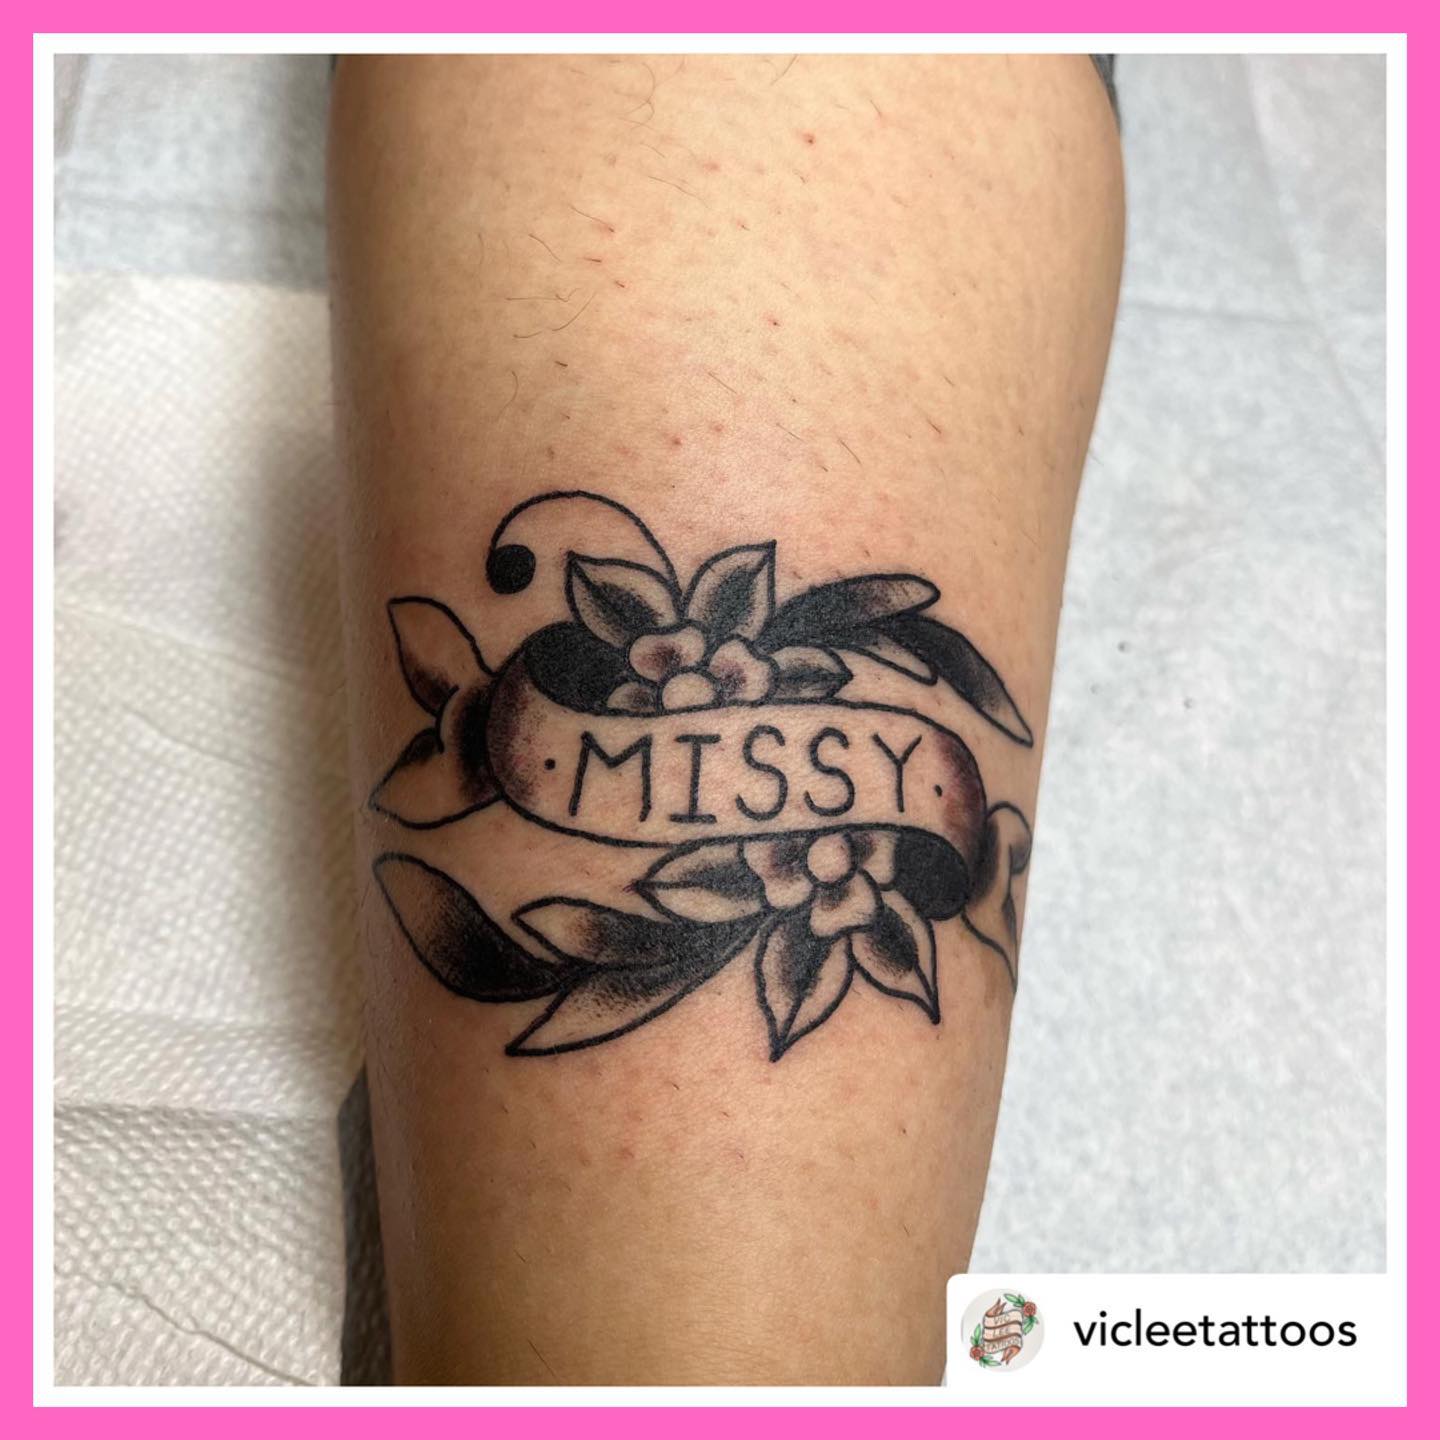 Tattoo by @vicleetattoos Link in bio to book.